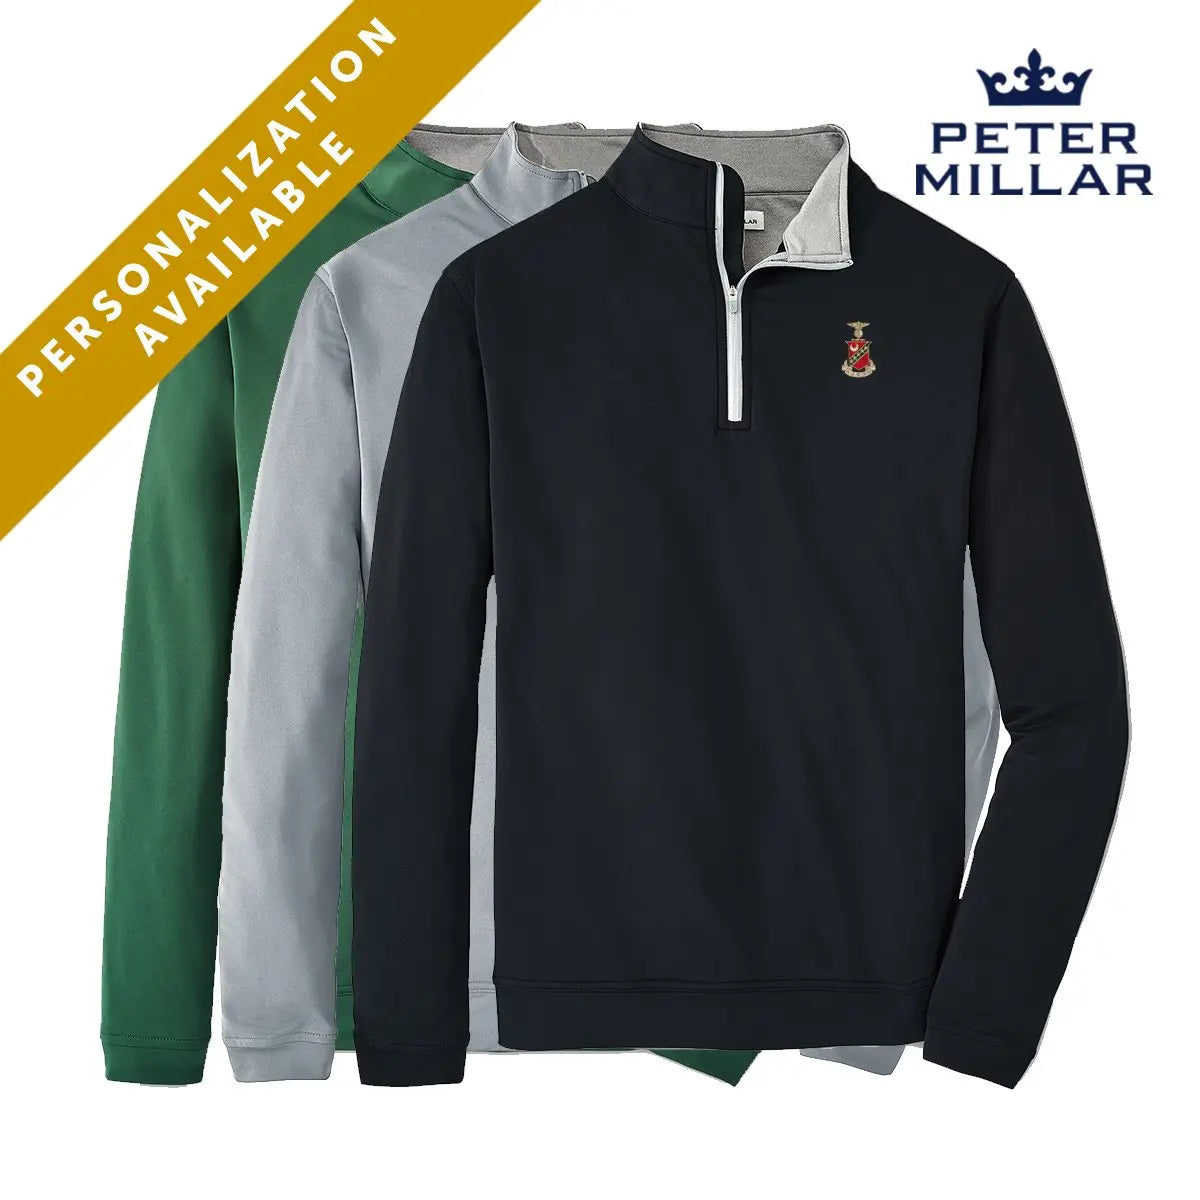 Kappa Sig Peter Millar Perth Stretch Quarter Zip with Crest - Kappa Sigma Official Store